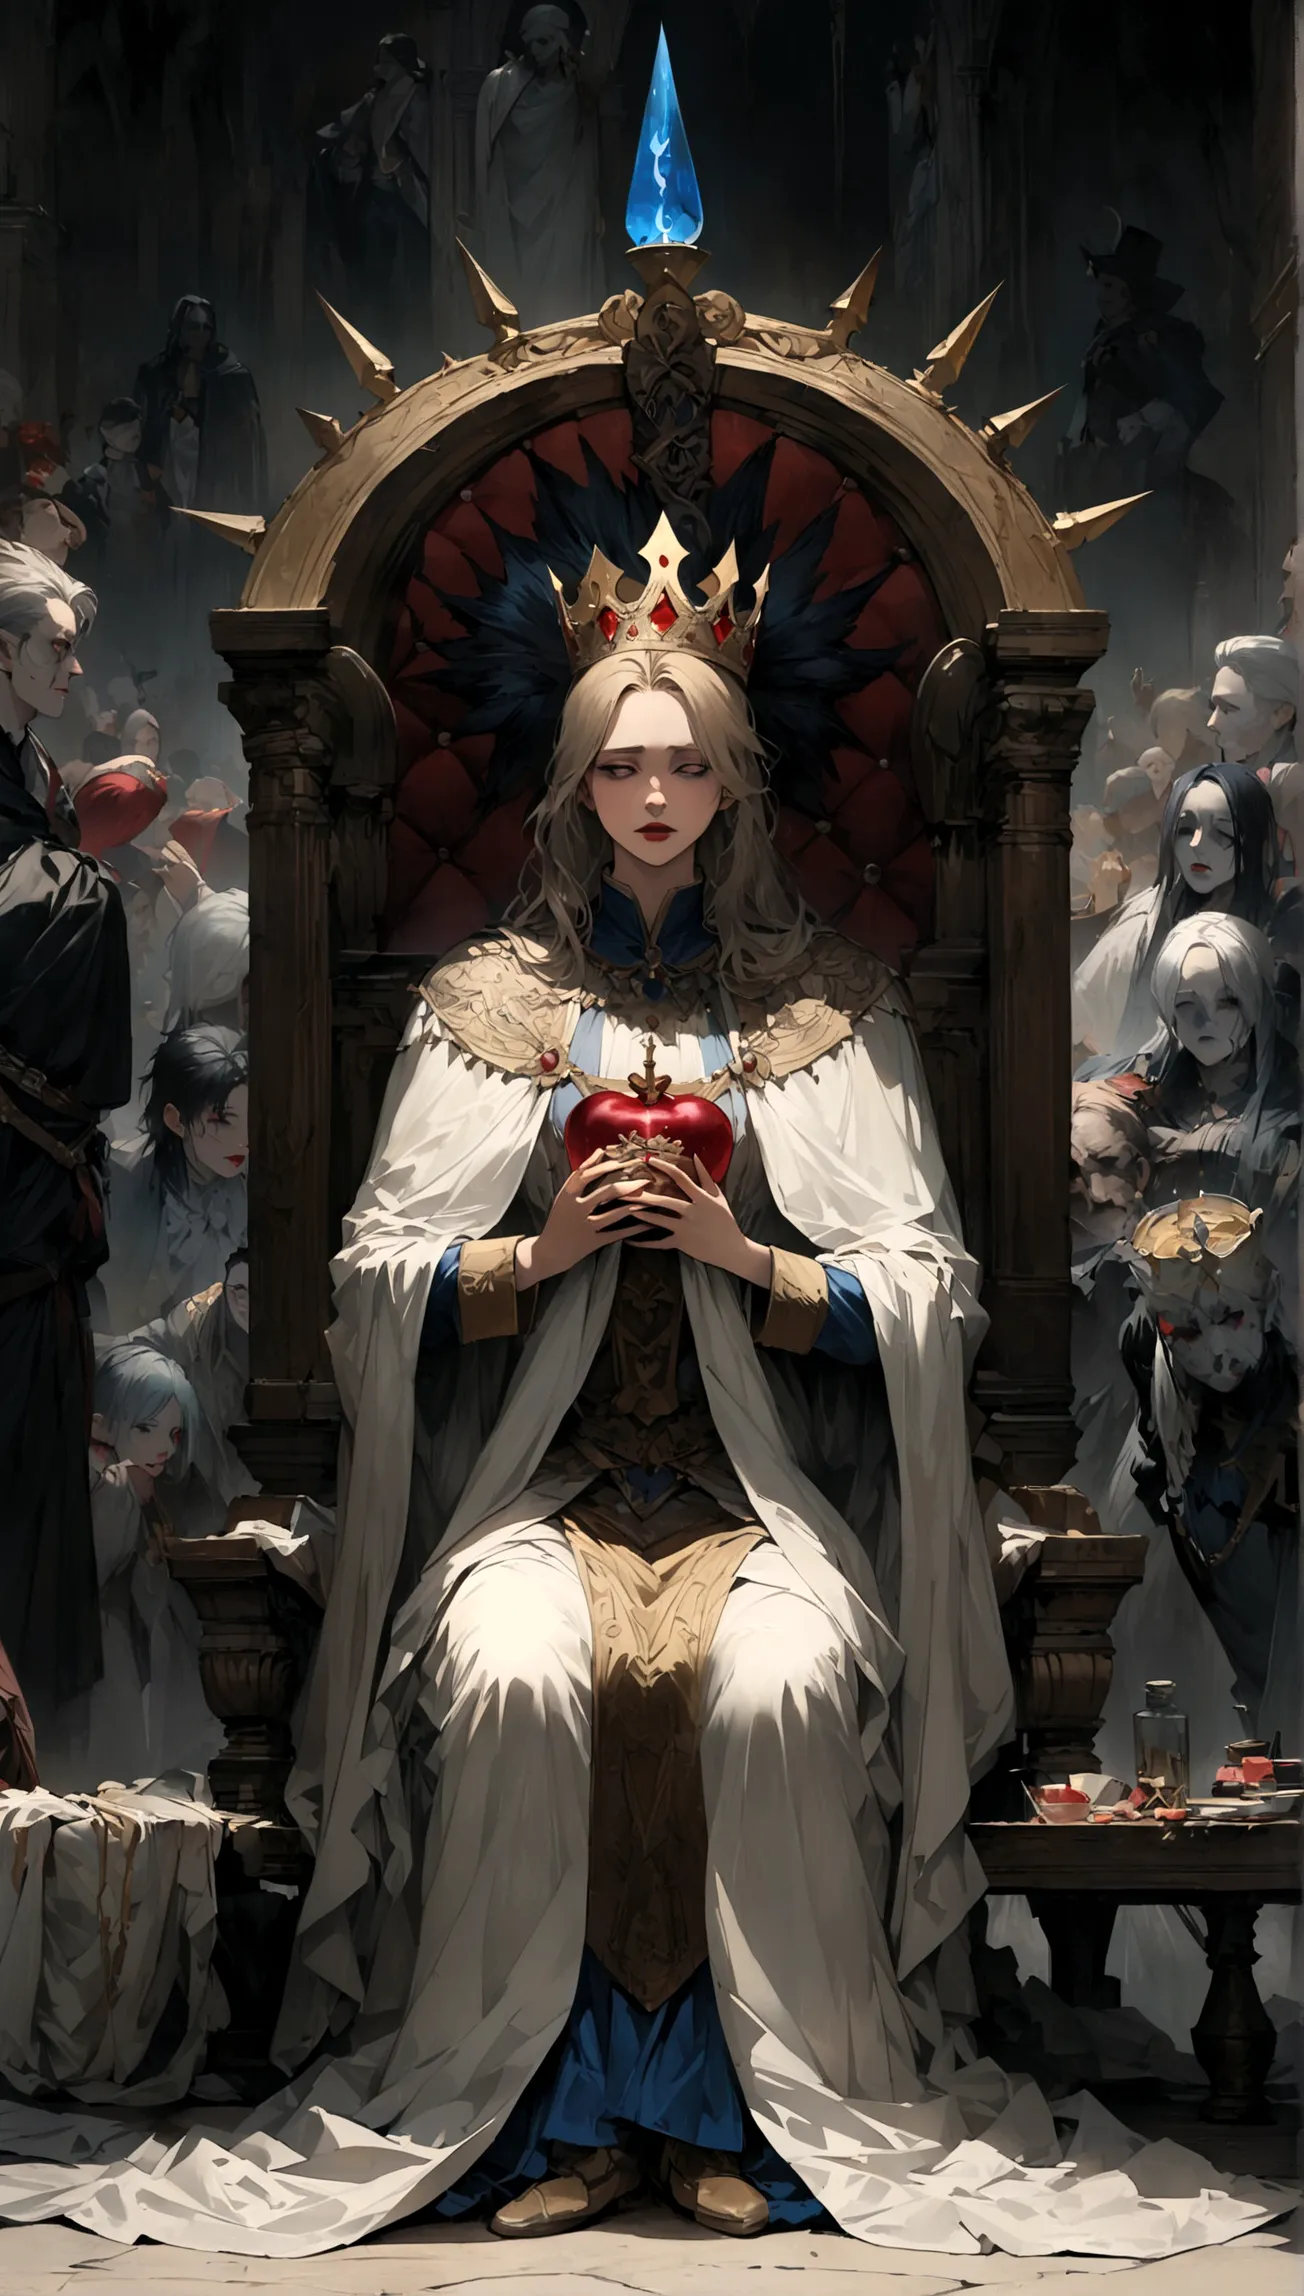 Throne room scenery,oil painting style,king sitting on the throne,Subjects prostrating,Subject's clothing details,There is a dis...